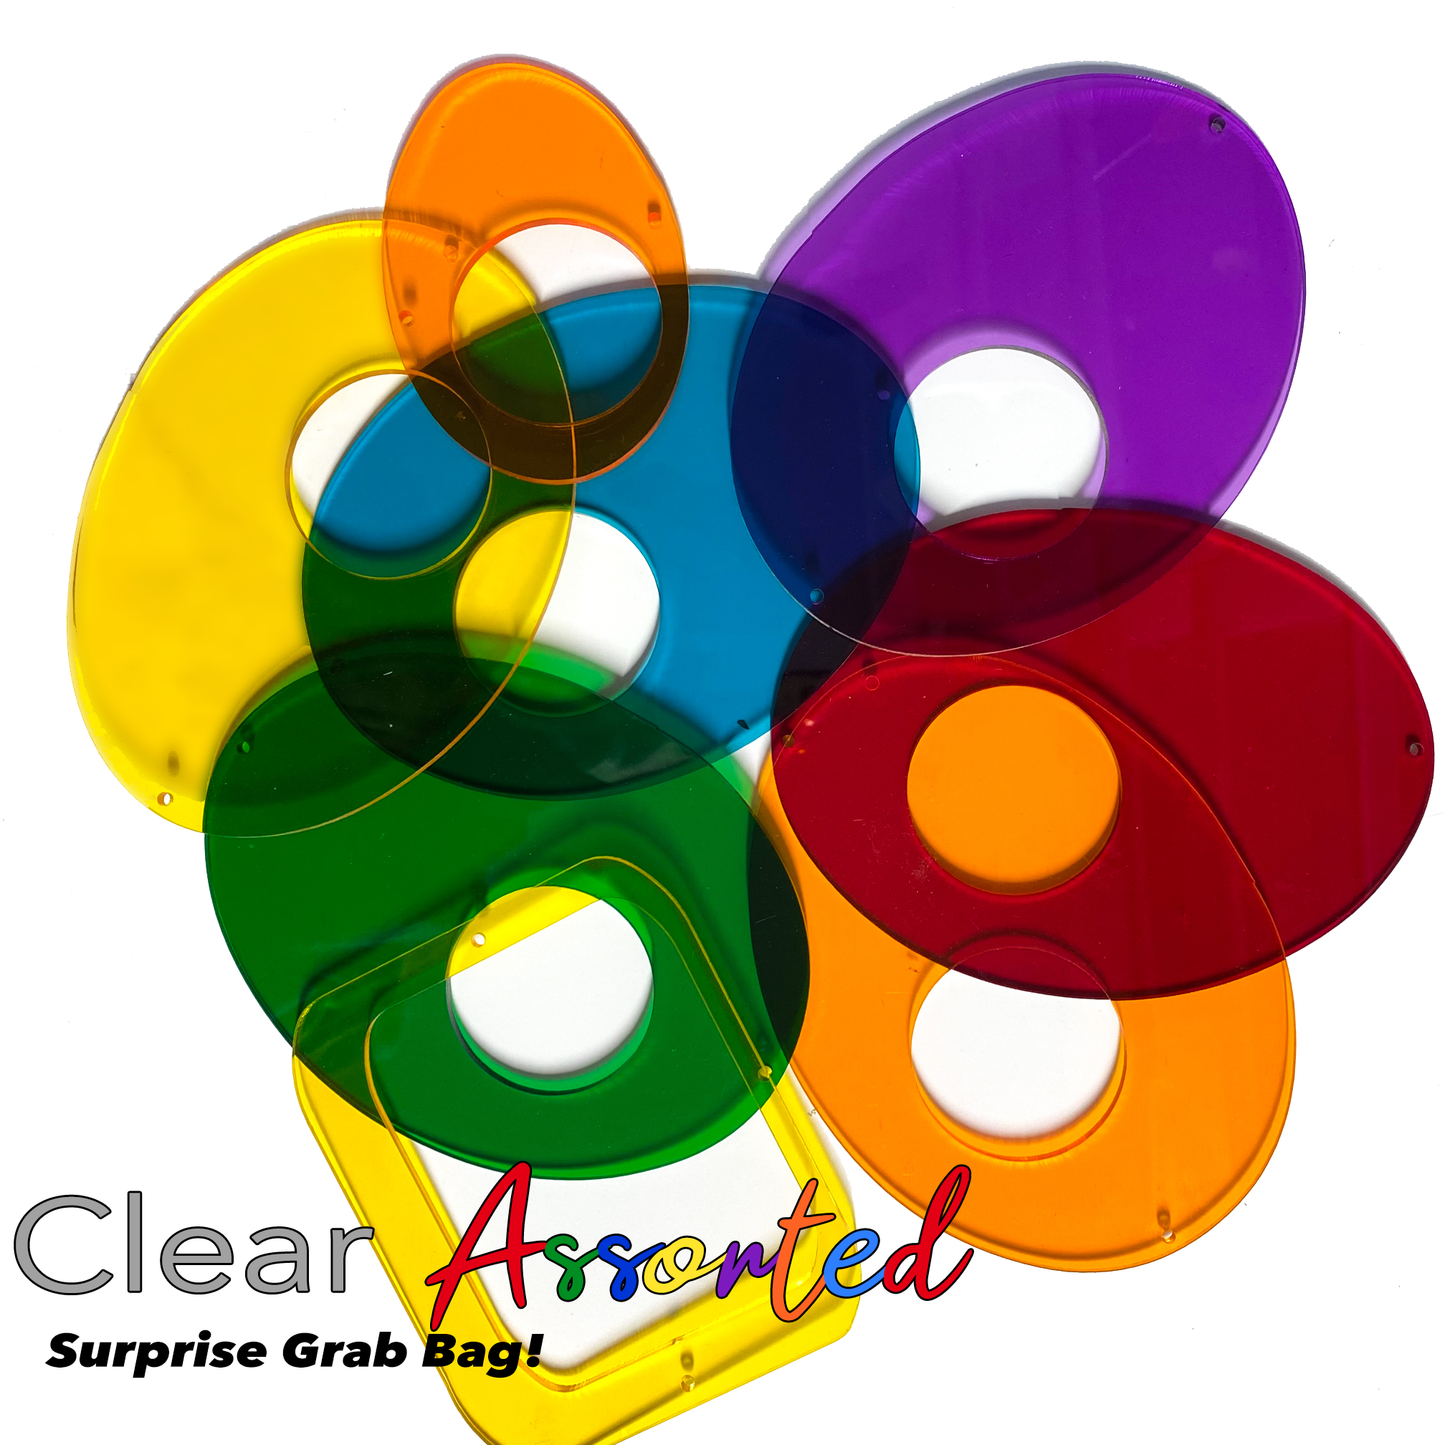 Clear acrylic assorted retro shapes - Assorted Multi Color Surprise Grab Bag to make DIY mobiles by AtomicMobiles.com